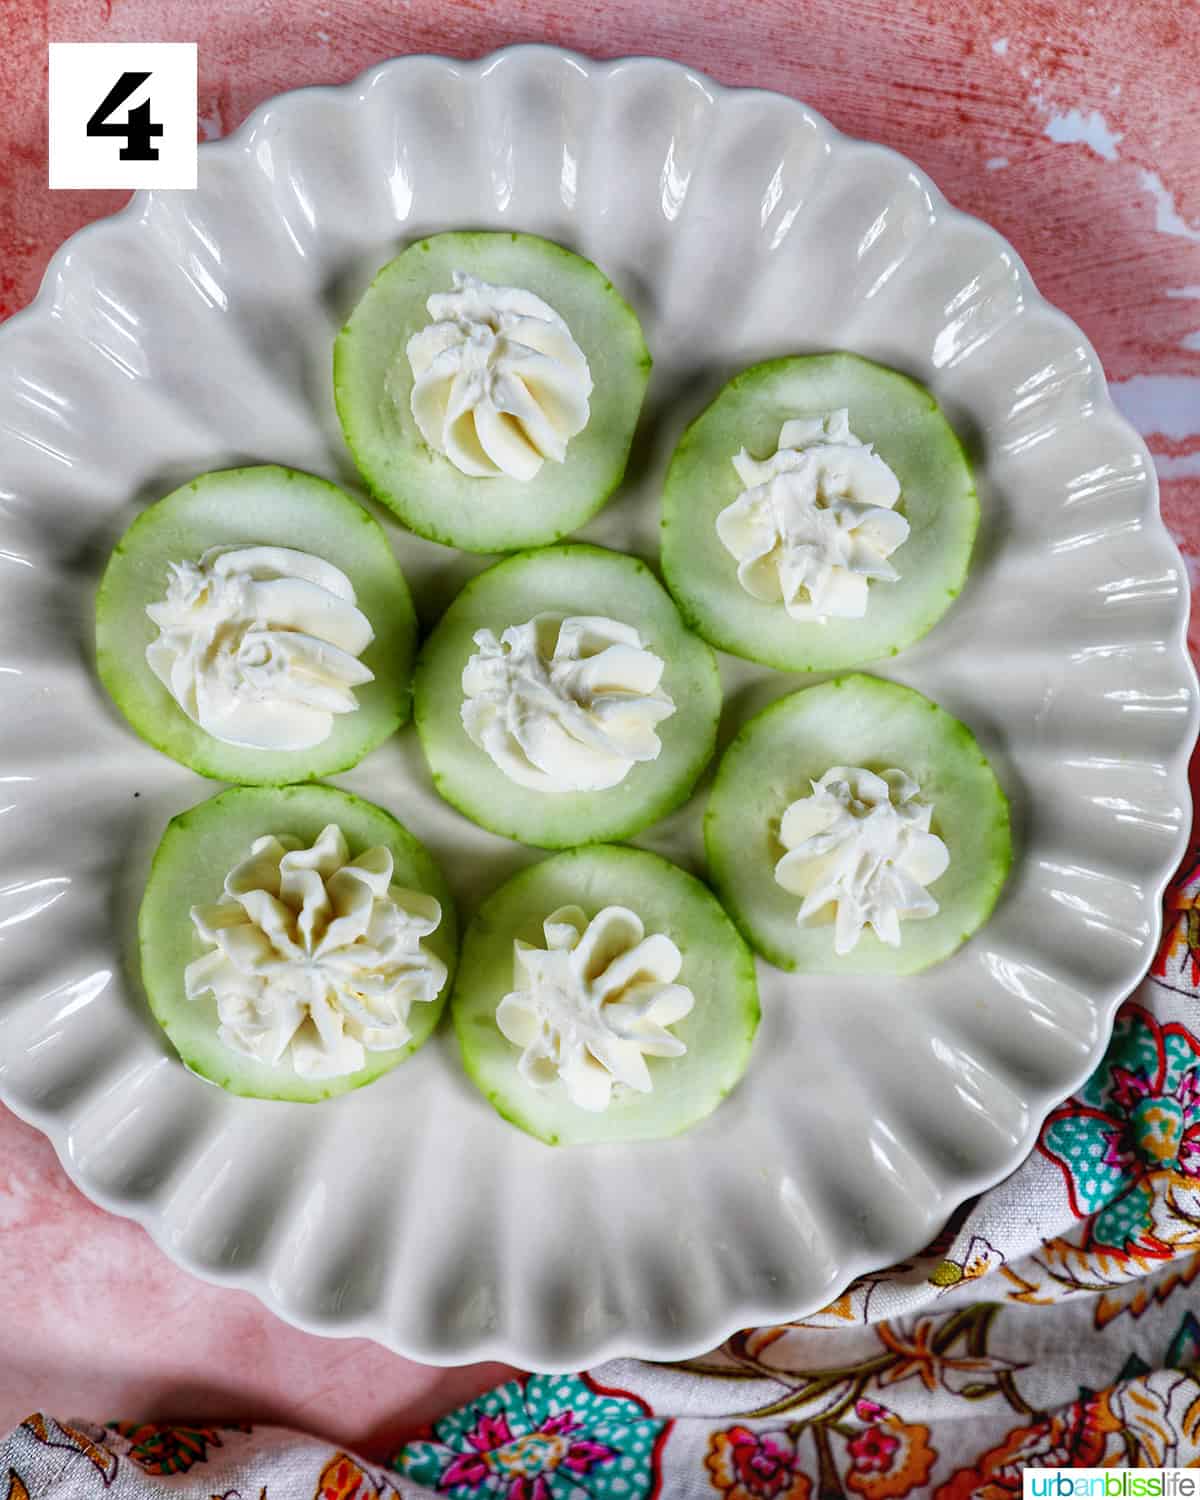 cucumber slices with cream cheese on a scalloped plate on pink background.